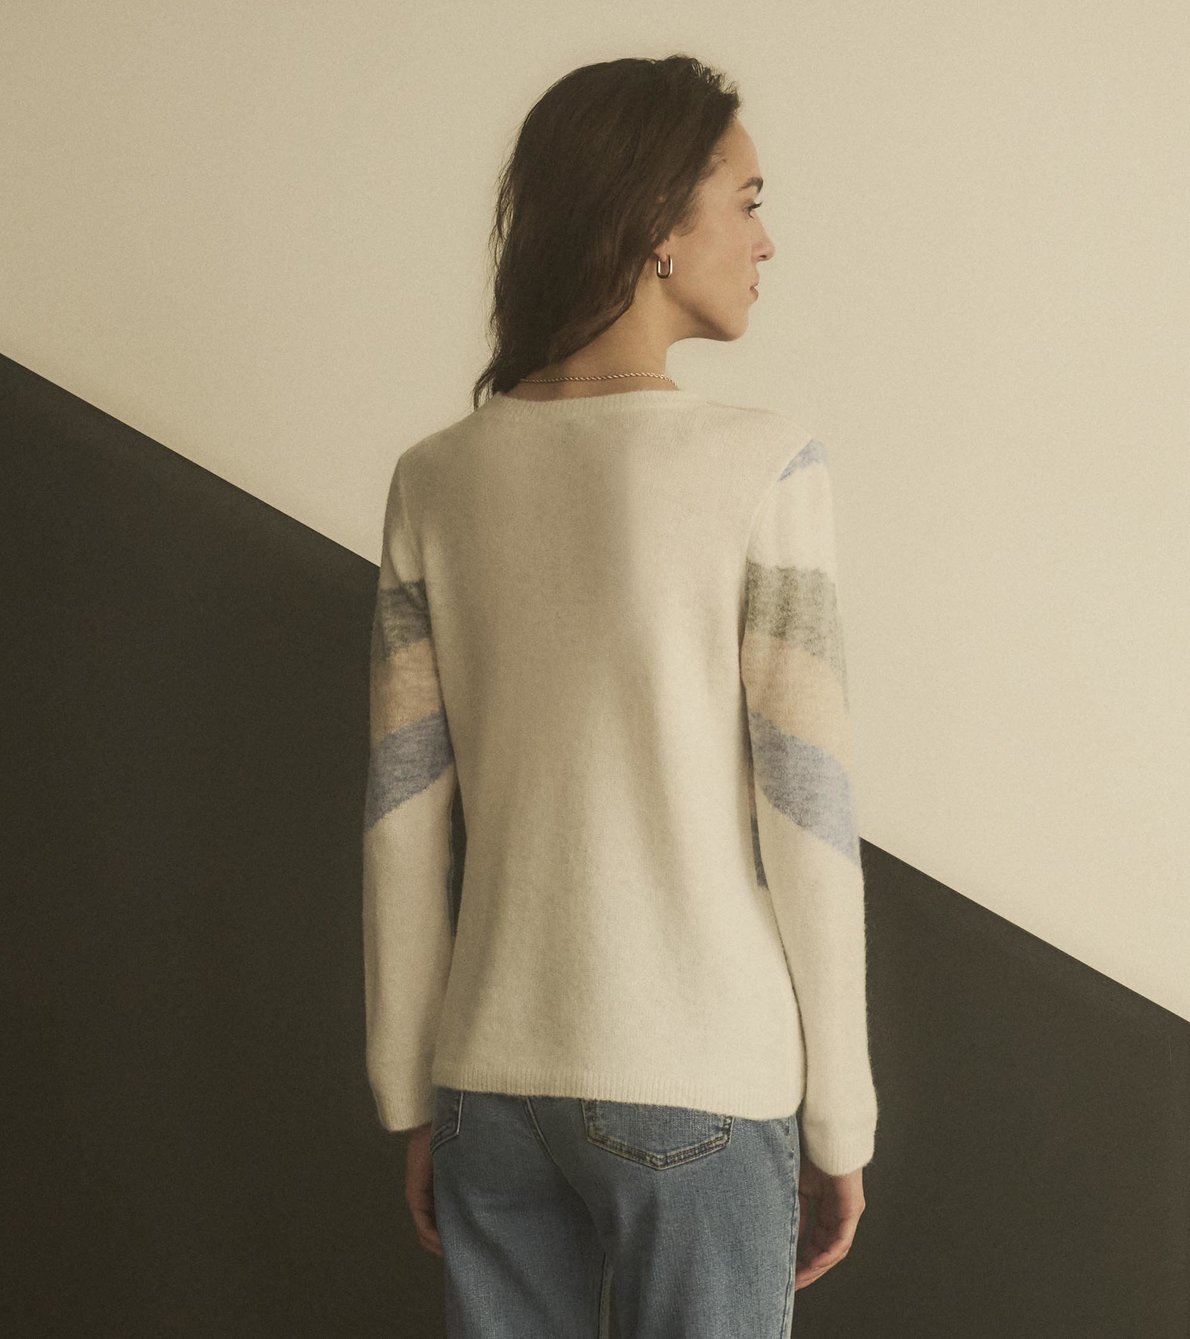 View larger image of Landscape Sweater - Chilled Horizon